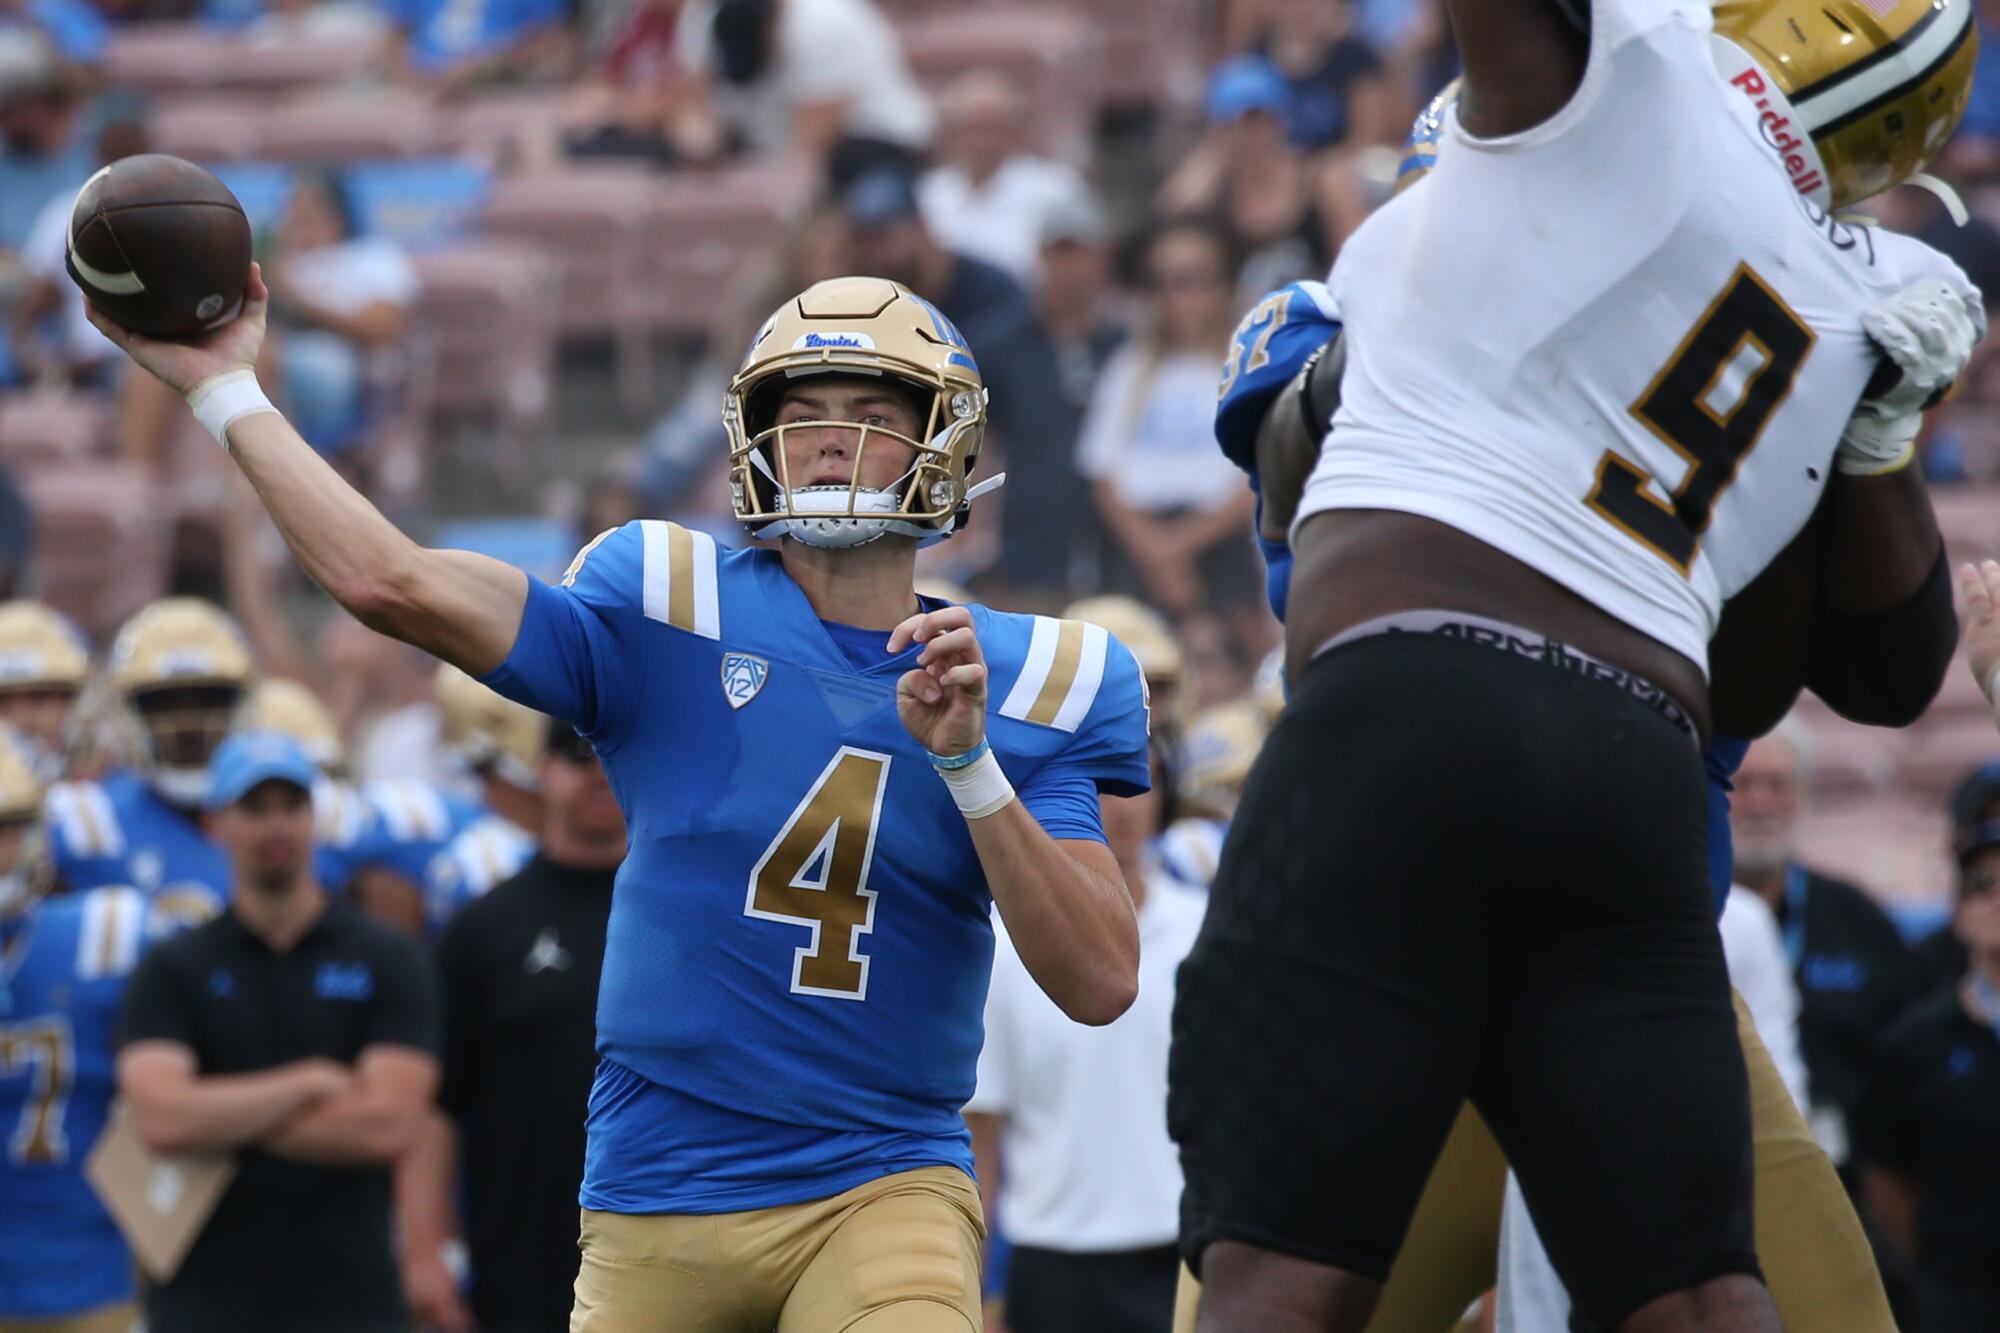 UCLA quarterback Ethan Garbers filled in for Dorian Thompson-Robinson to lead the team to a win against Alabama State.